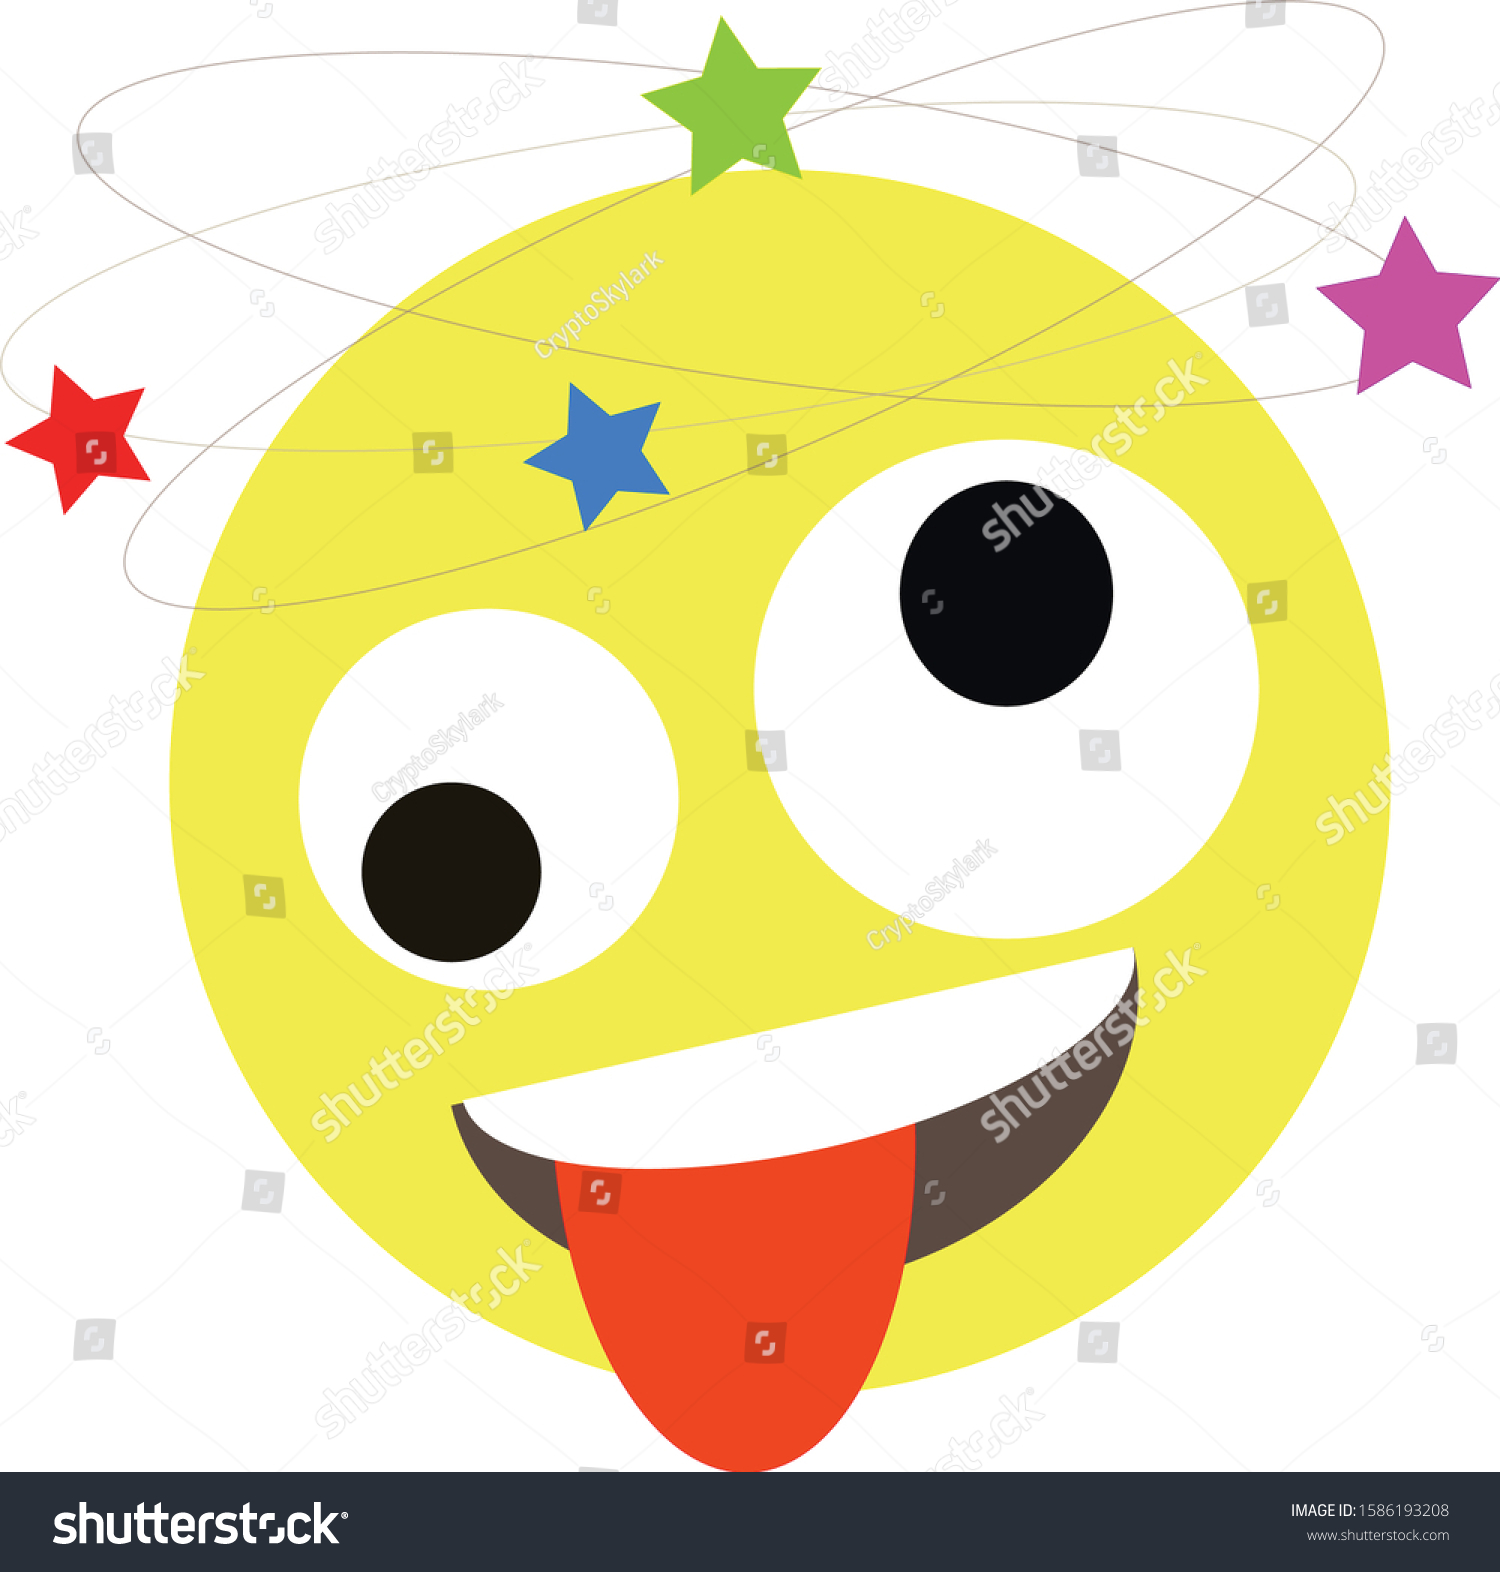 stock-vector-dizzy-yellow-emoji-seeing-stars-over-head-yellow-emoticon-face-with-crazy-eyes-tongue-sticking-1586193208.jpg